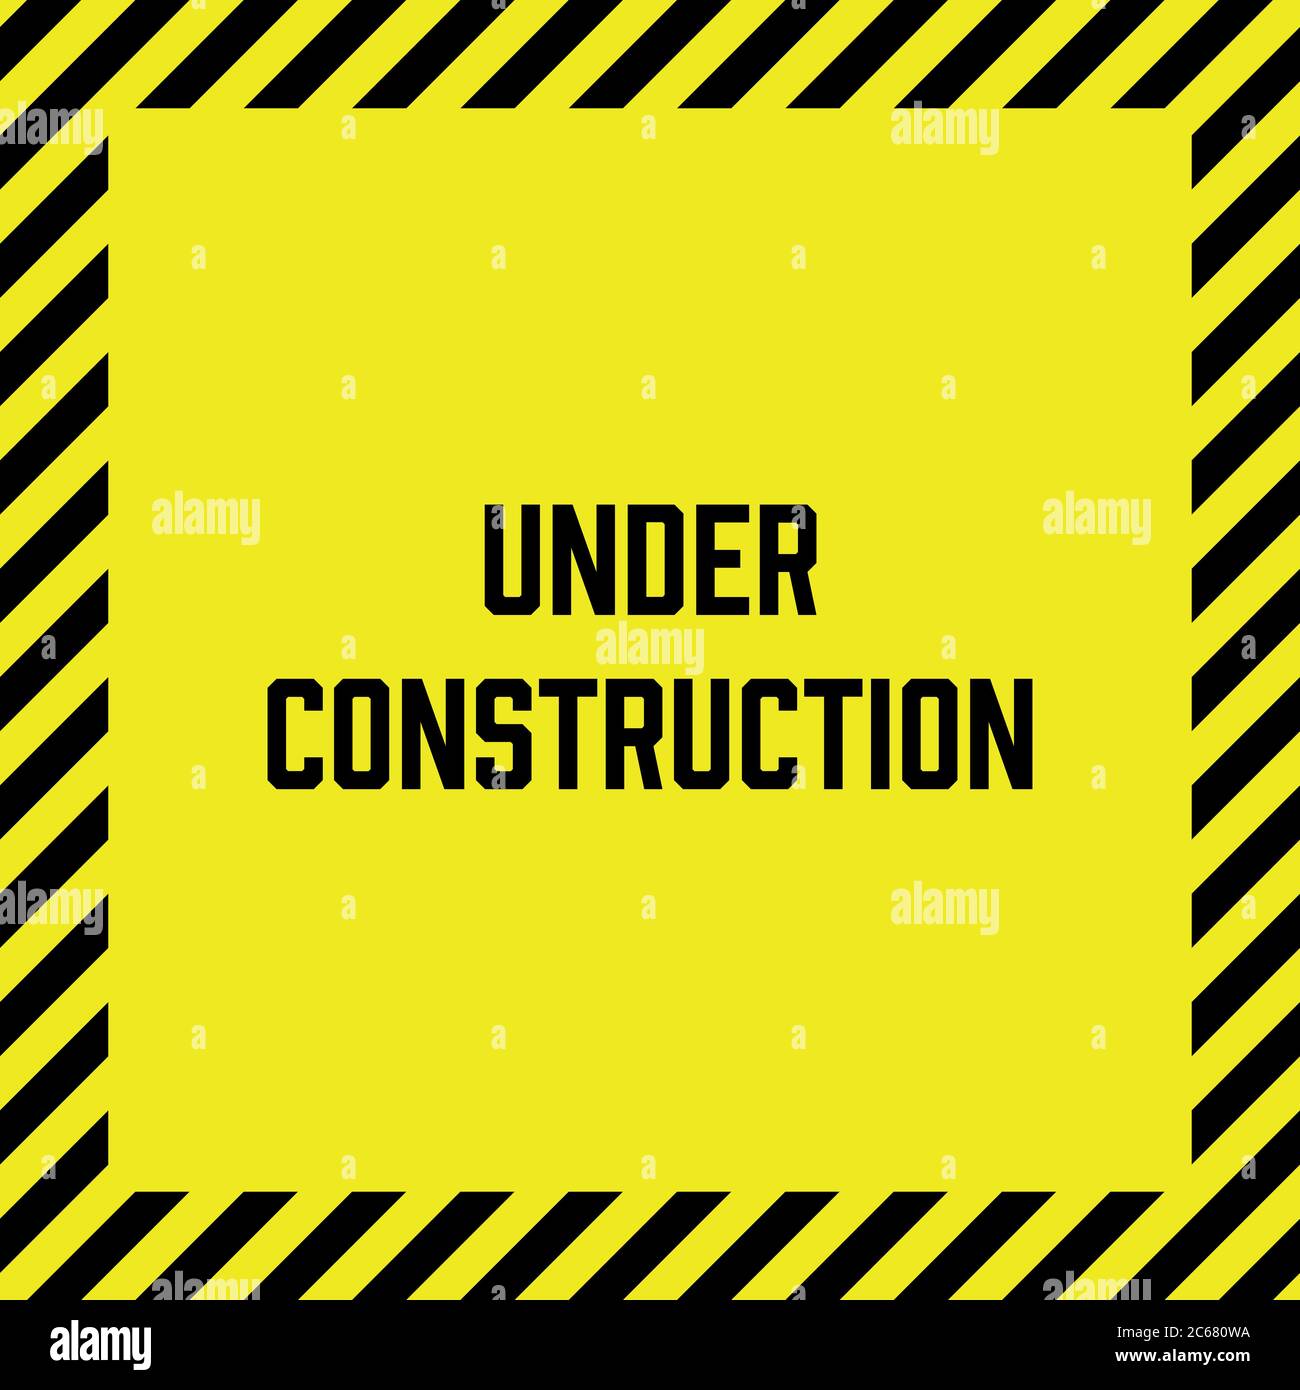 Under construction label with yellow and black striped frame. Square ...